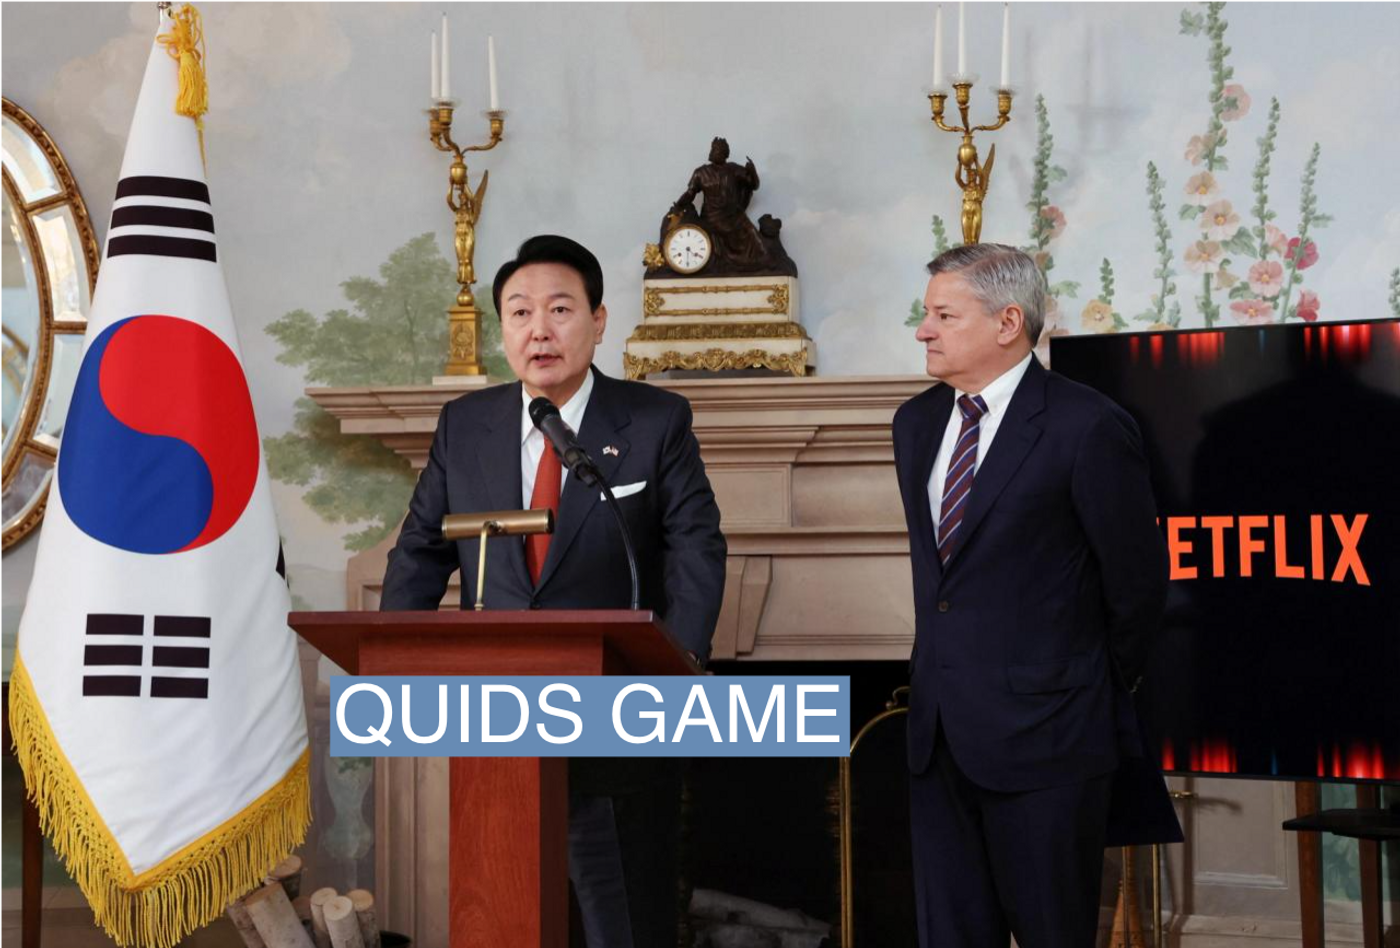 South Korean President Yoon Suk Yeol speaks next to Netflix co-CEO Ted Sarandos during a news conference in Washington, U.S., April 25, 2023. Yonhap via REUTERS